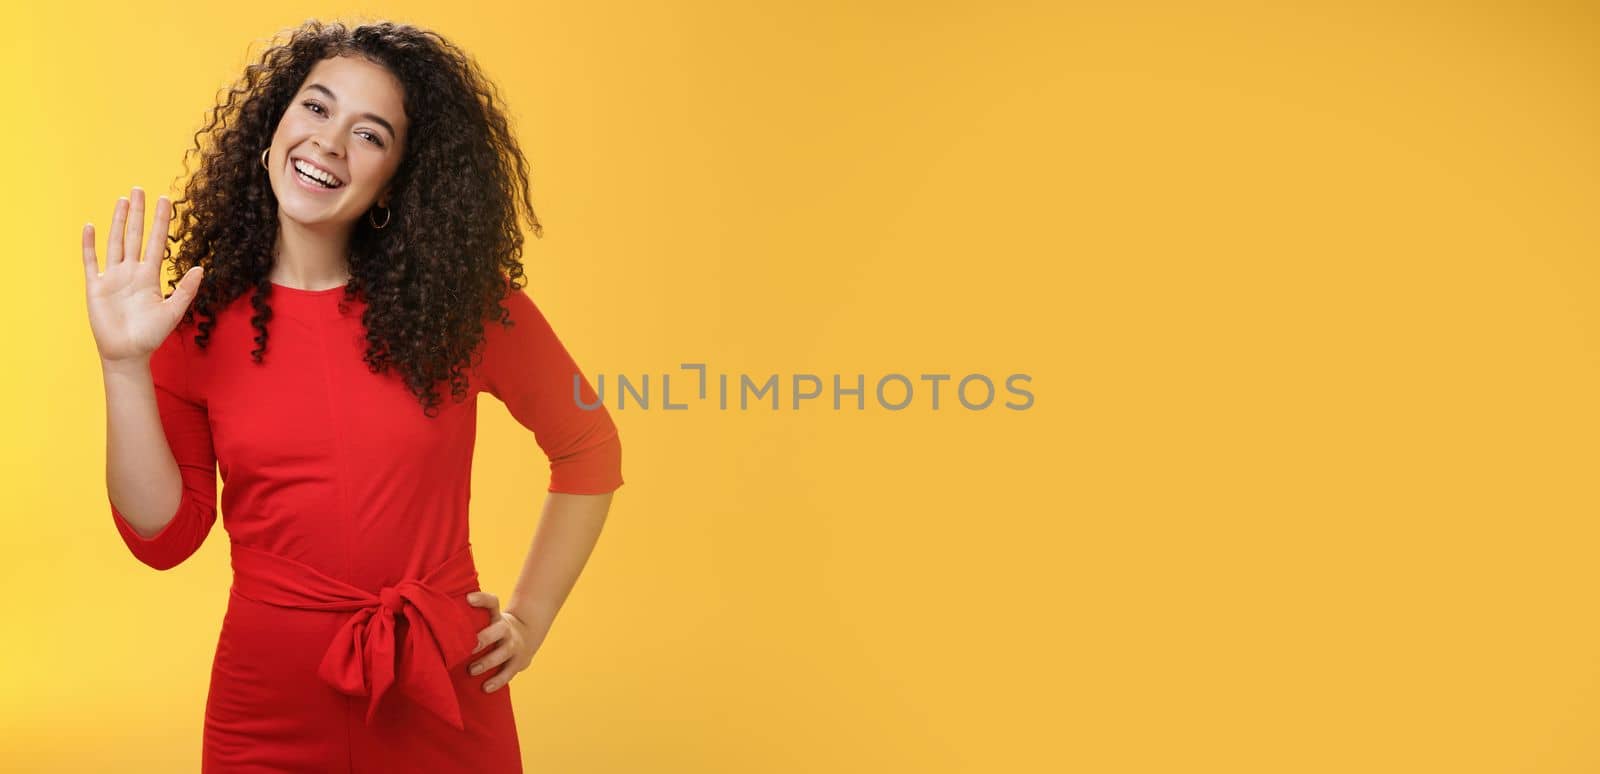 Hey my name is. Friendly-looking self-assured carefree cute 25s woman with curly hair waving with raised palm in hello or hi gesture smiling broadly greeting new coworkers over yellow background.